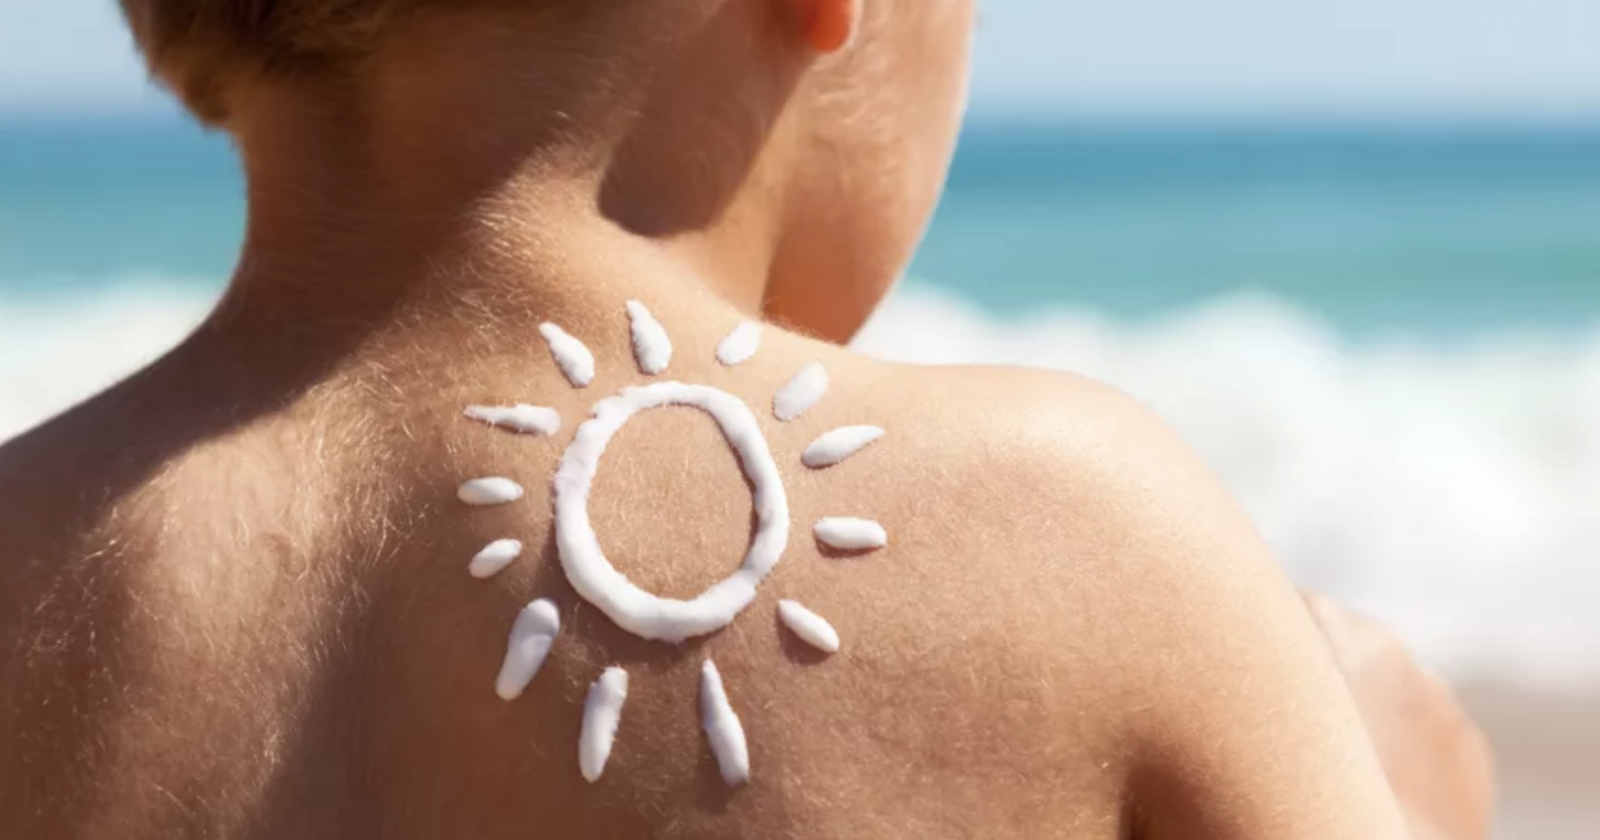 Sunscreen with SPF